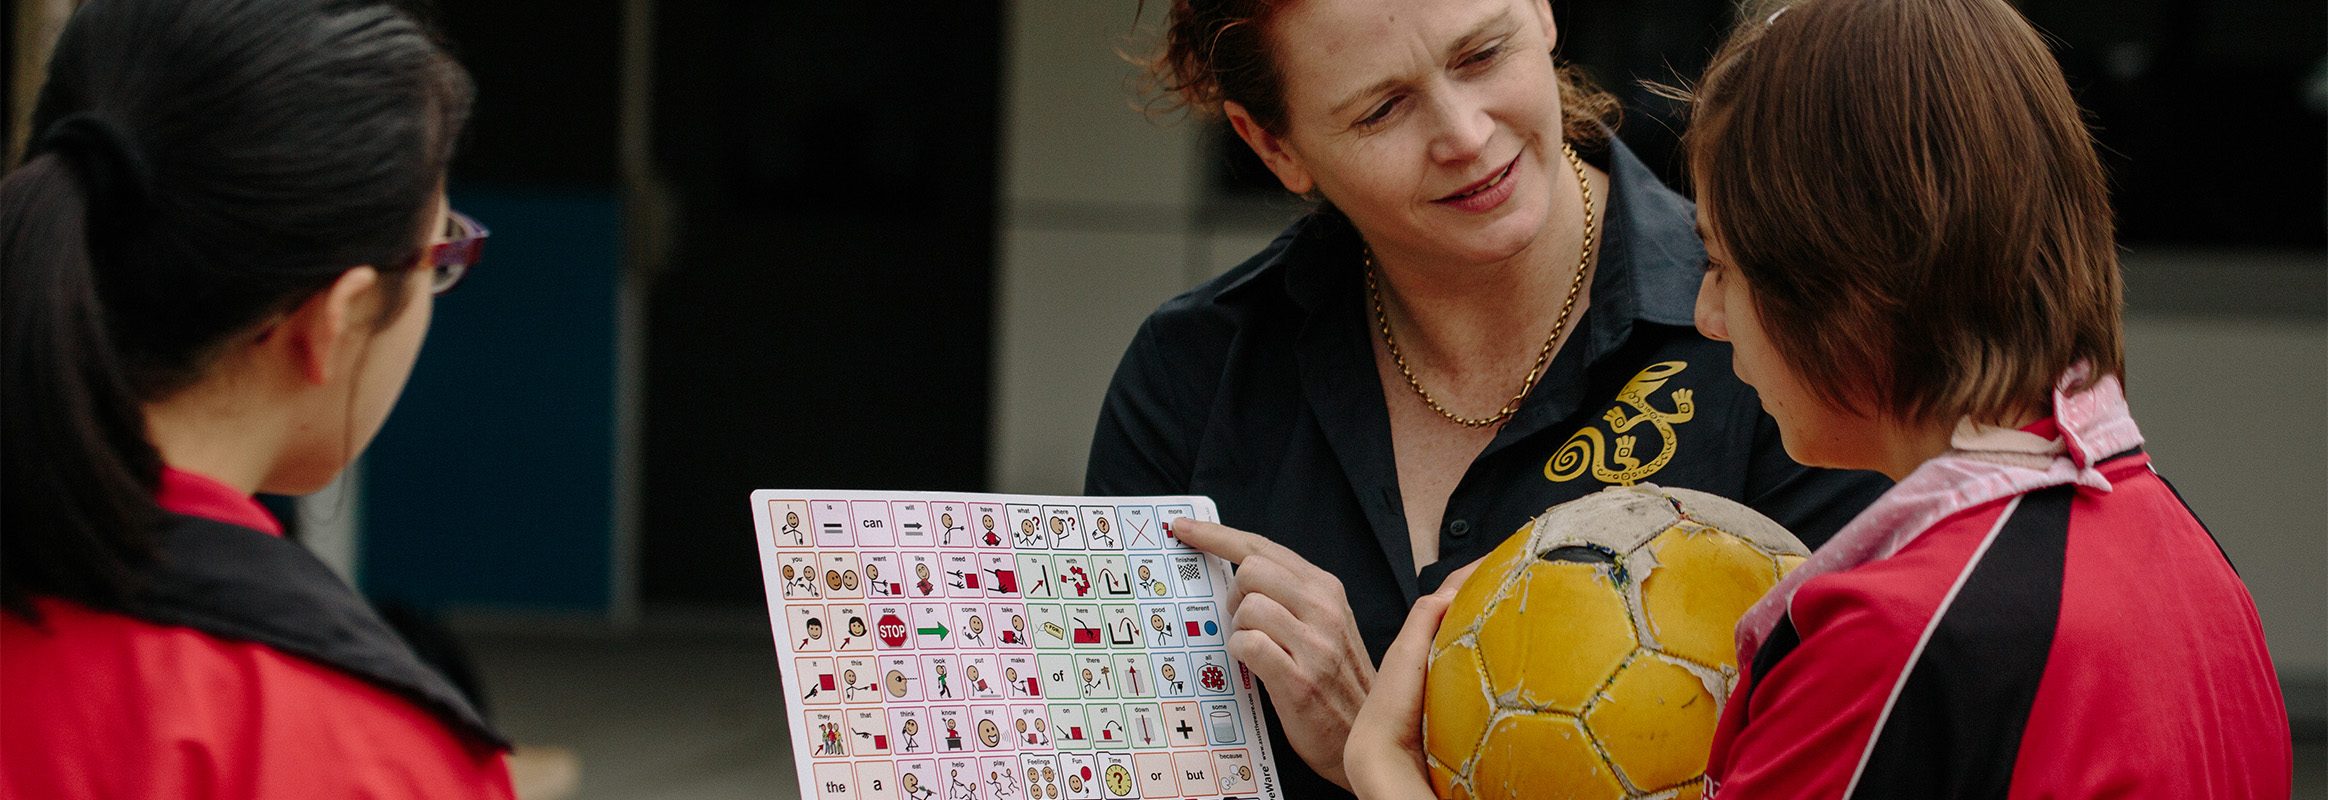 Young girl with soccer ball learning with core words board